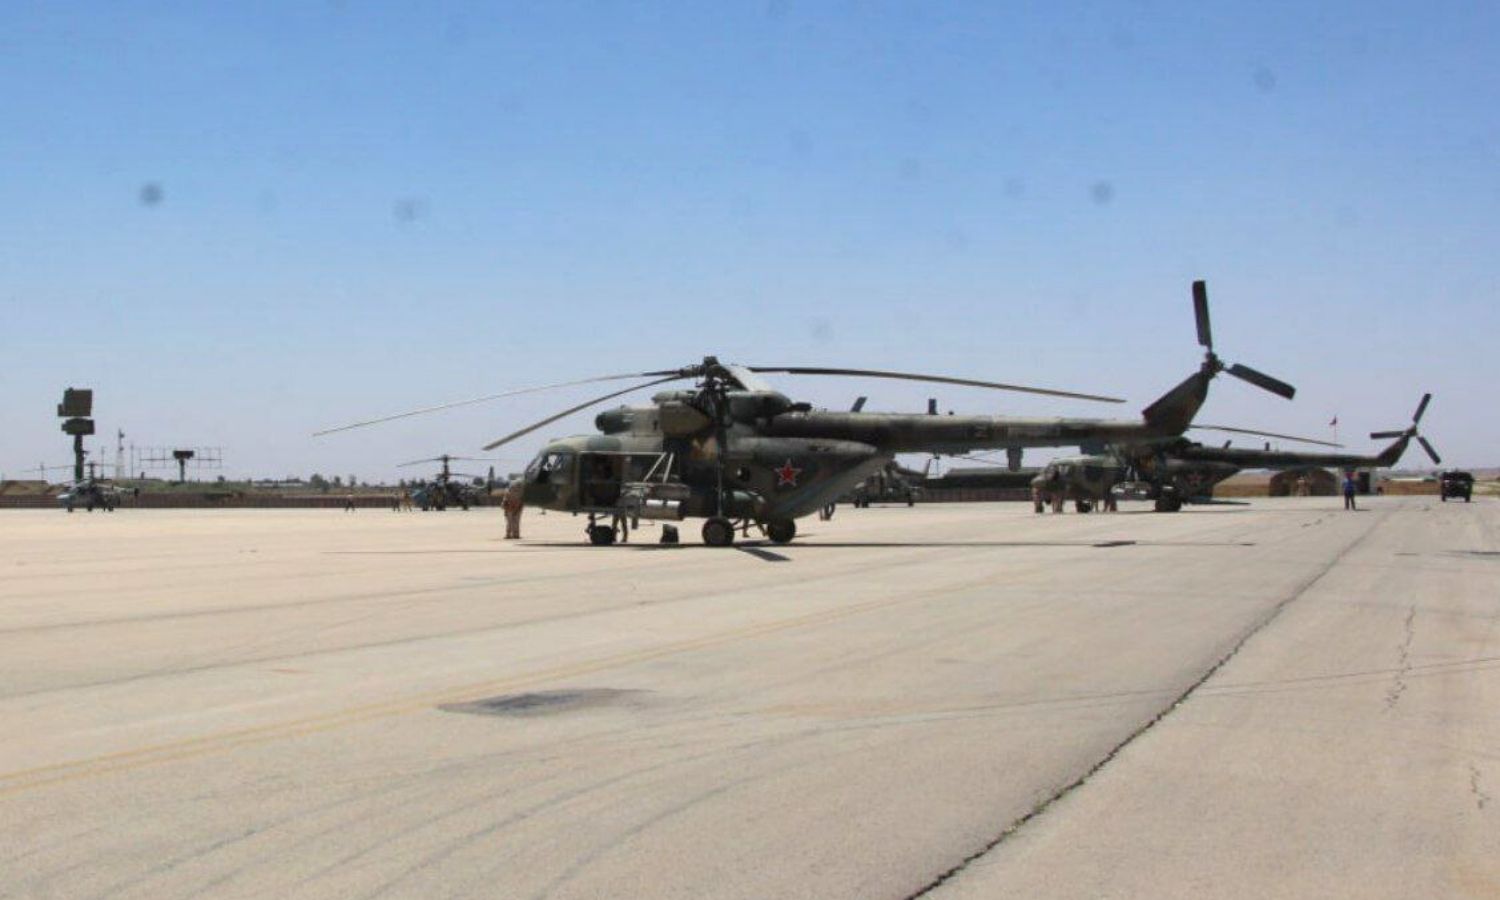 A Russian military plane at Qamishli Airport in northeastern Syria - 27 May 2022 (Hawar Heboo/Twitter)